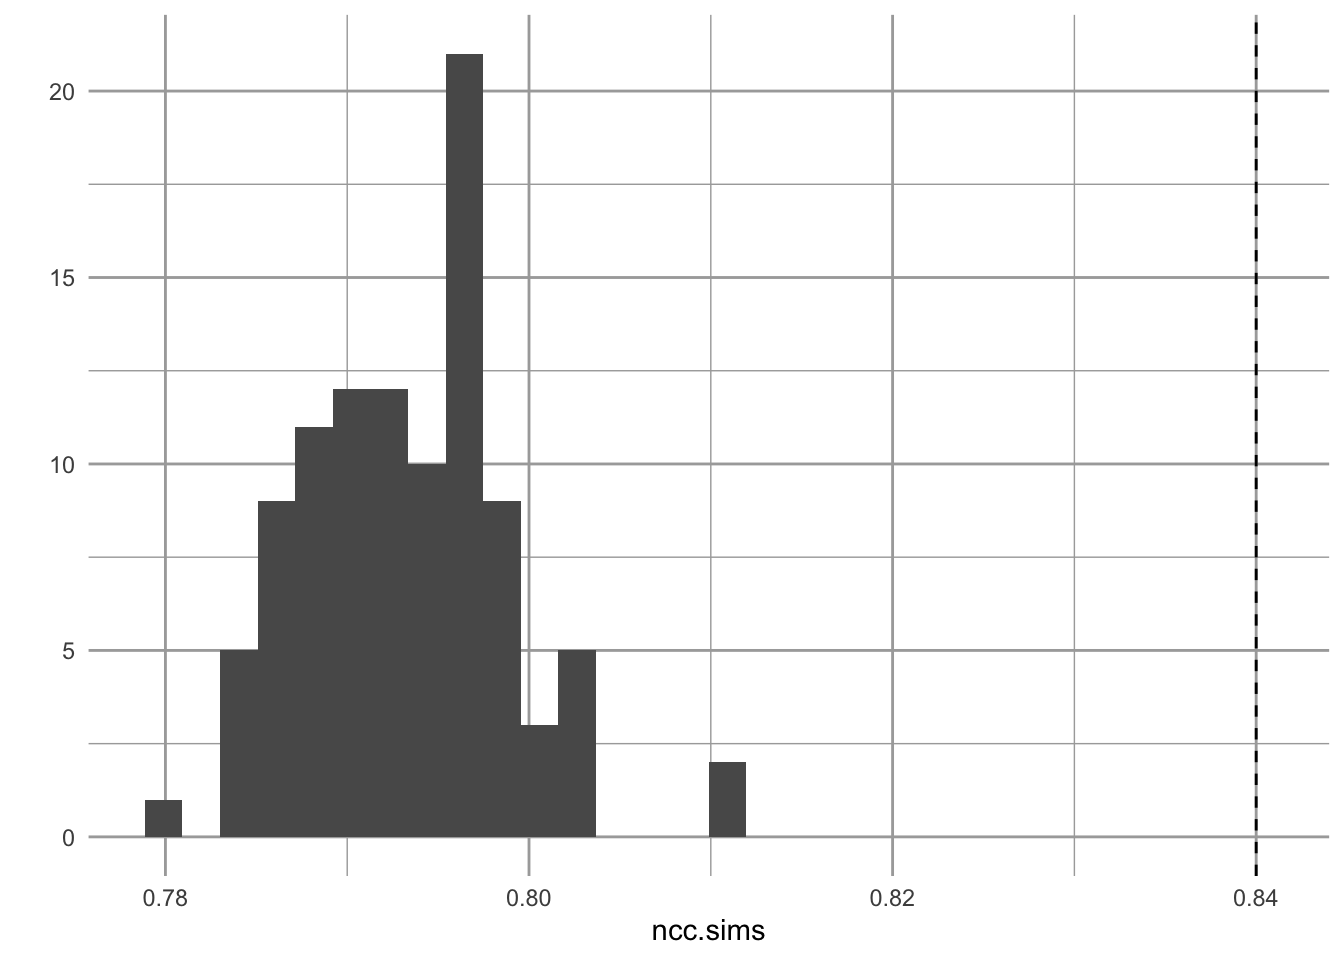 Observed node clustering appears unuusally high, relatively to that of random networks.